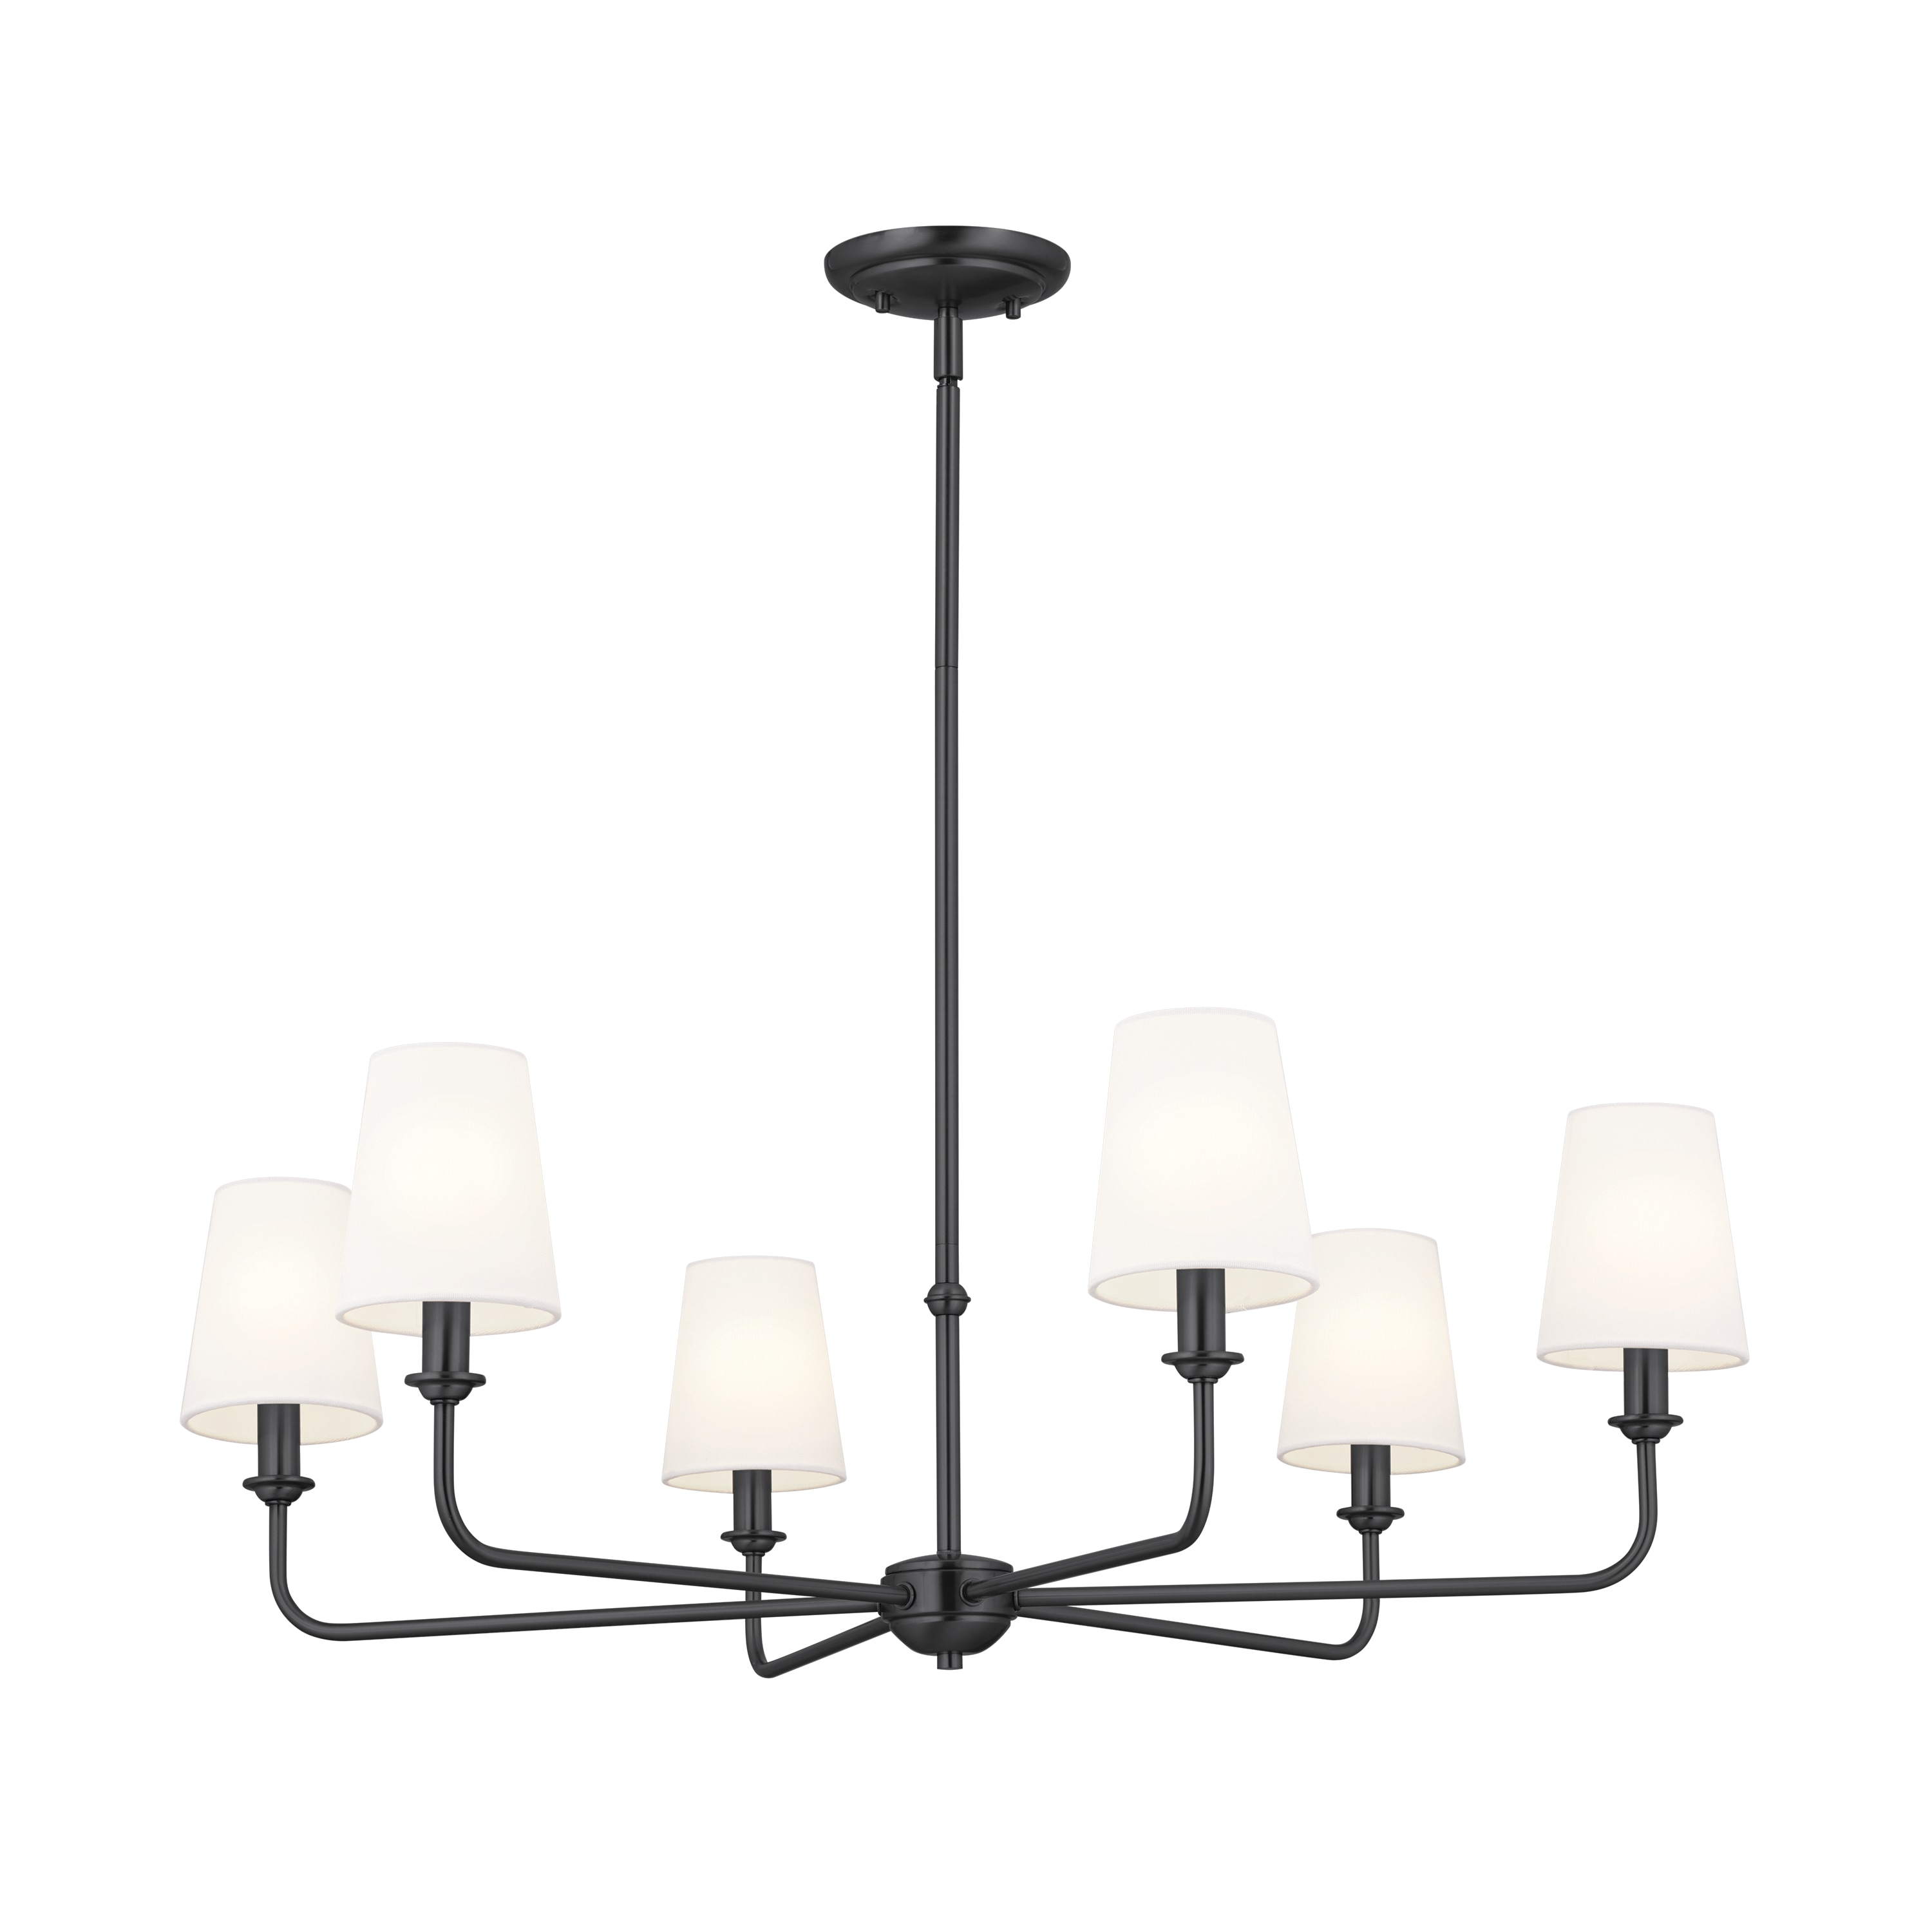 Kichler Pallas 6-Light Black Traditional Dry rated Chandelier at Lowes.com